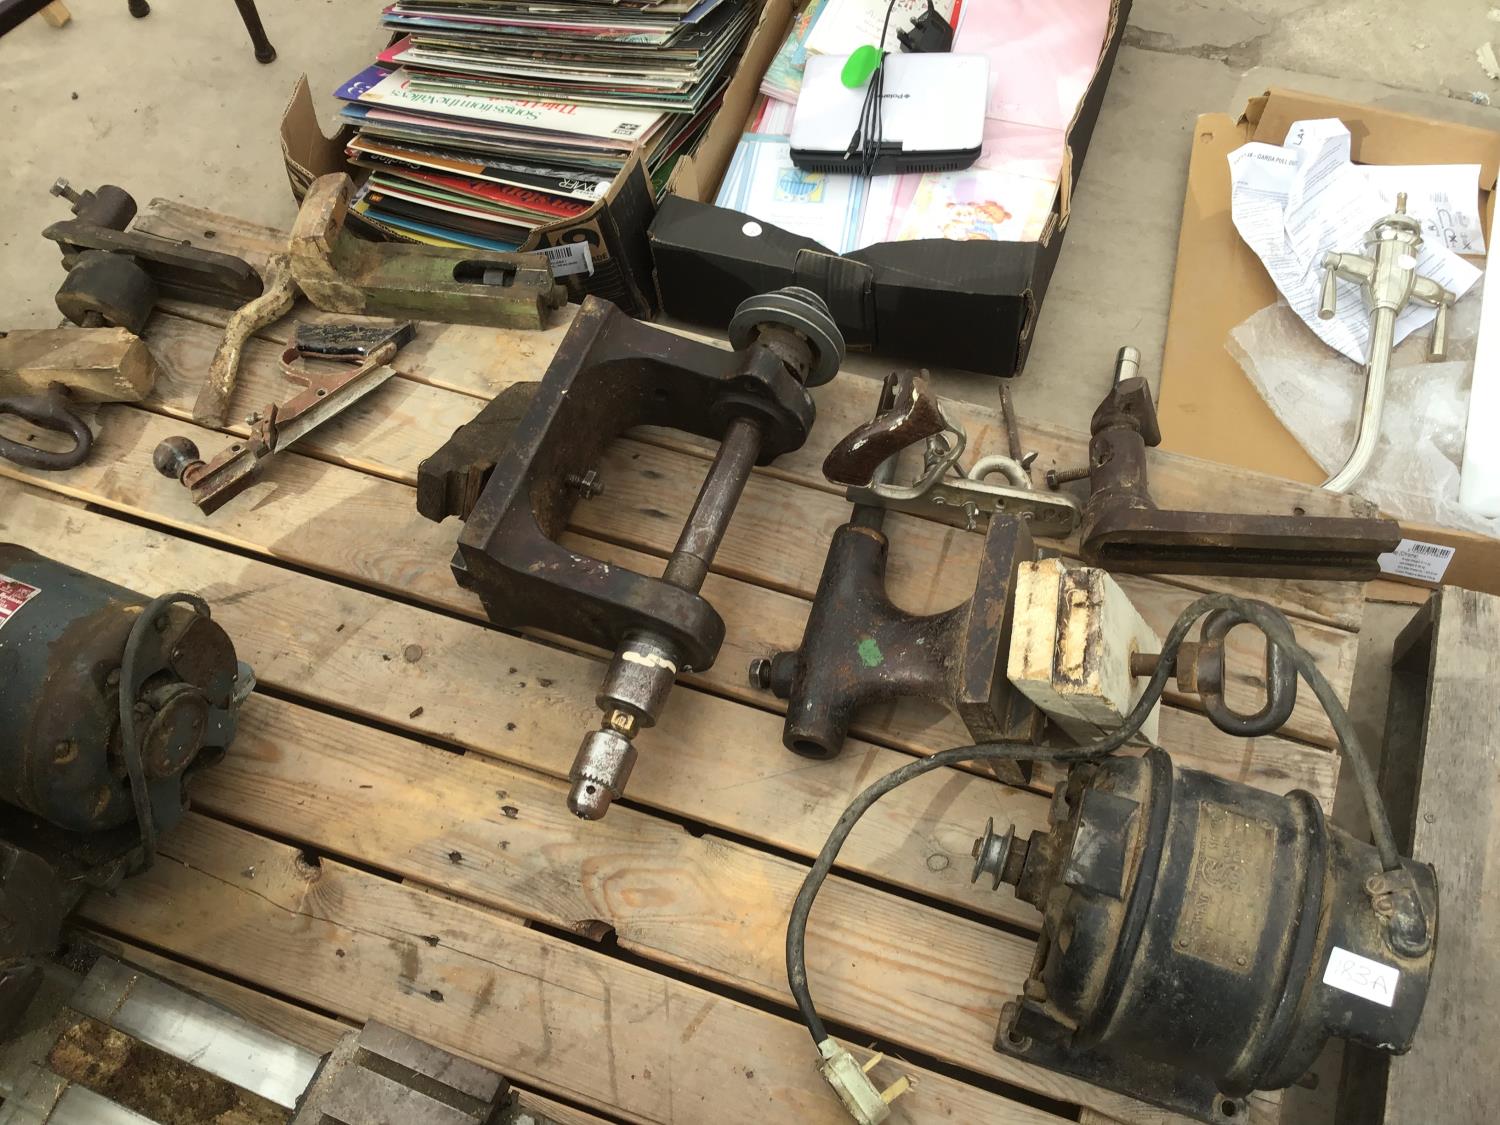 VARIOUS ITEMS TO INCLUDE A SINGER SEWING MACHINE MOTOR, DRILL AND OTHER HEAVY DUTY ATTACHMENTS